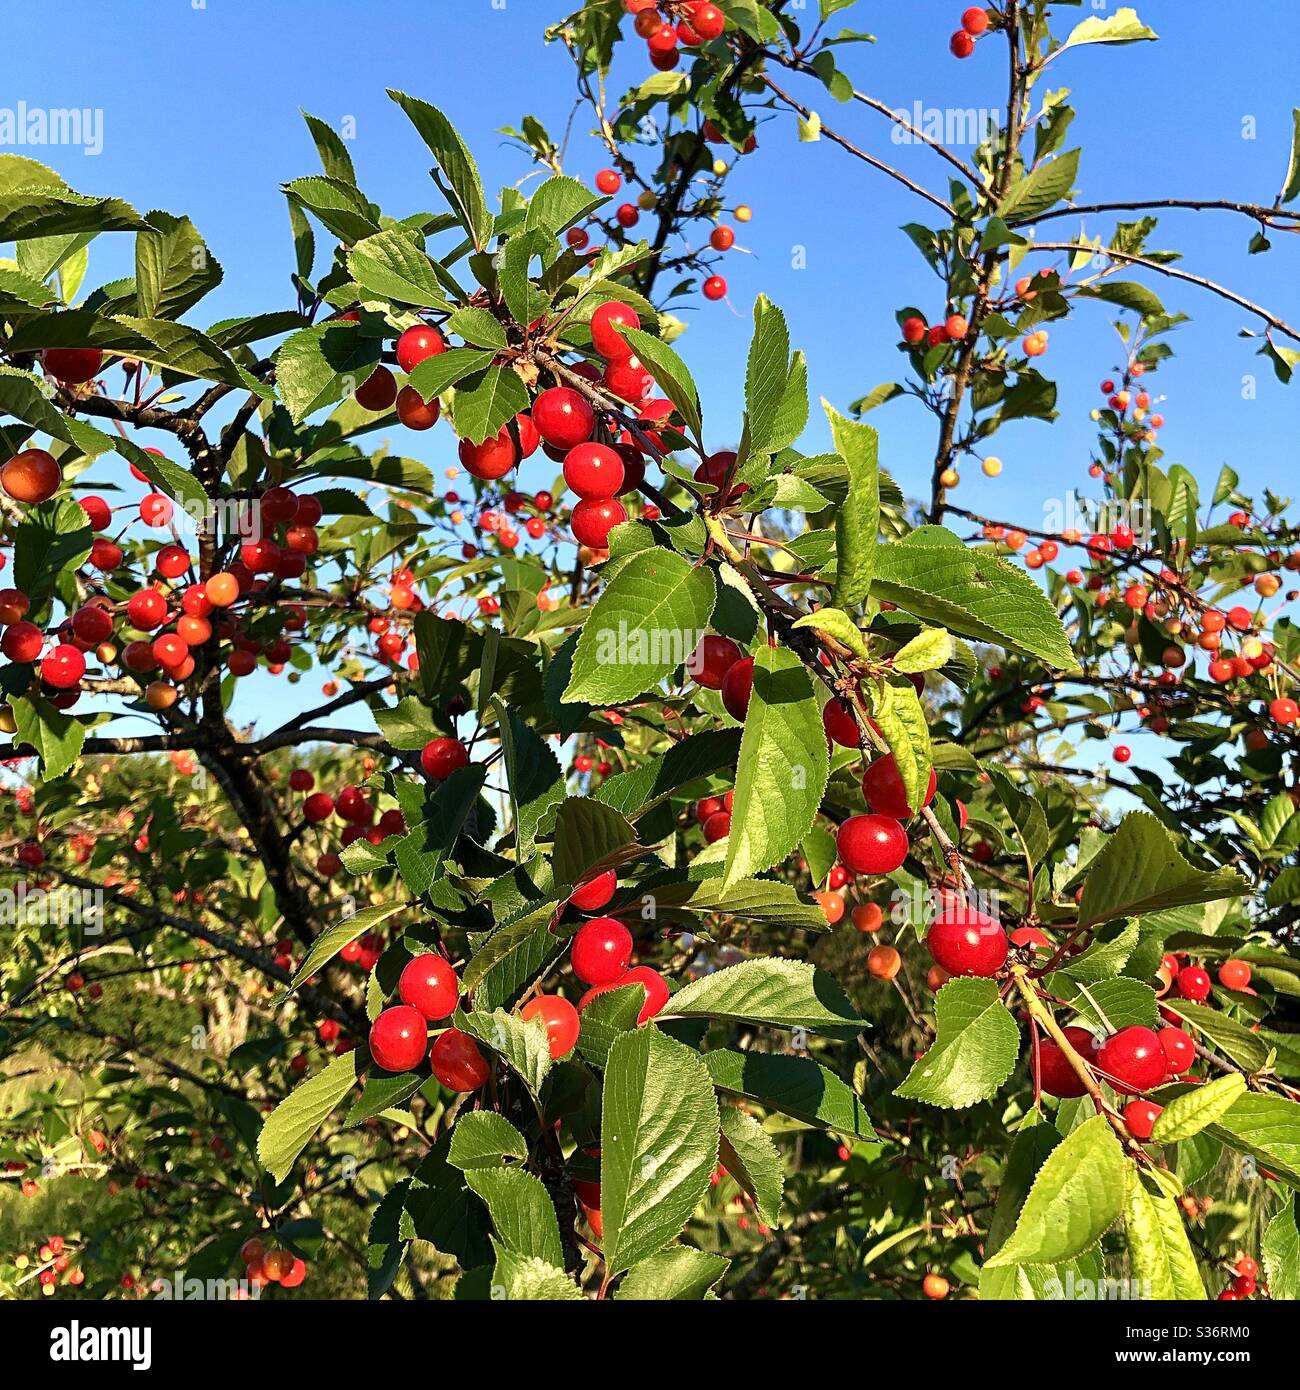 Red cherries ready for picking. Stock Photo